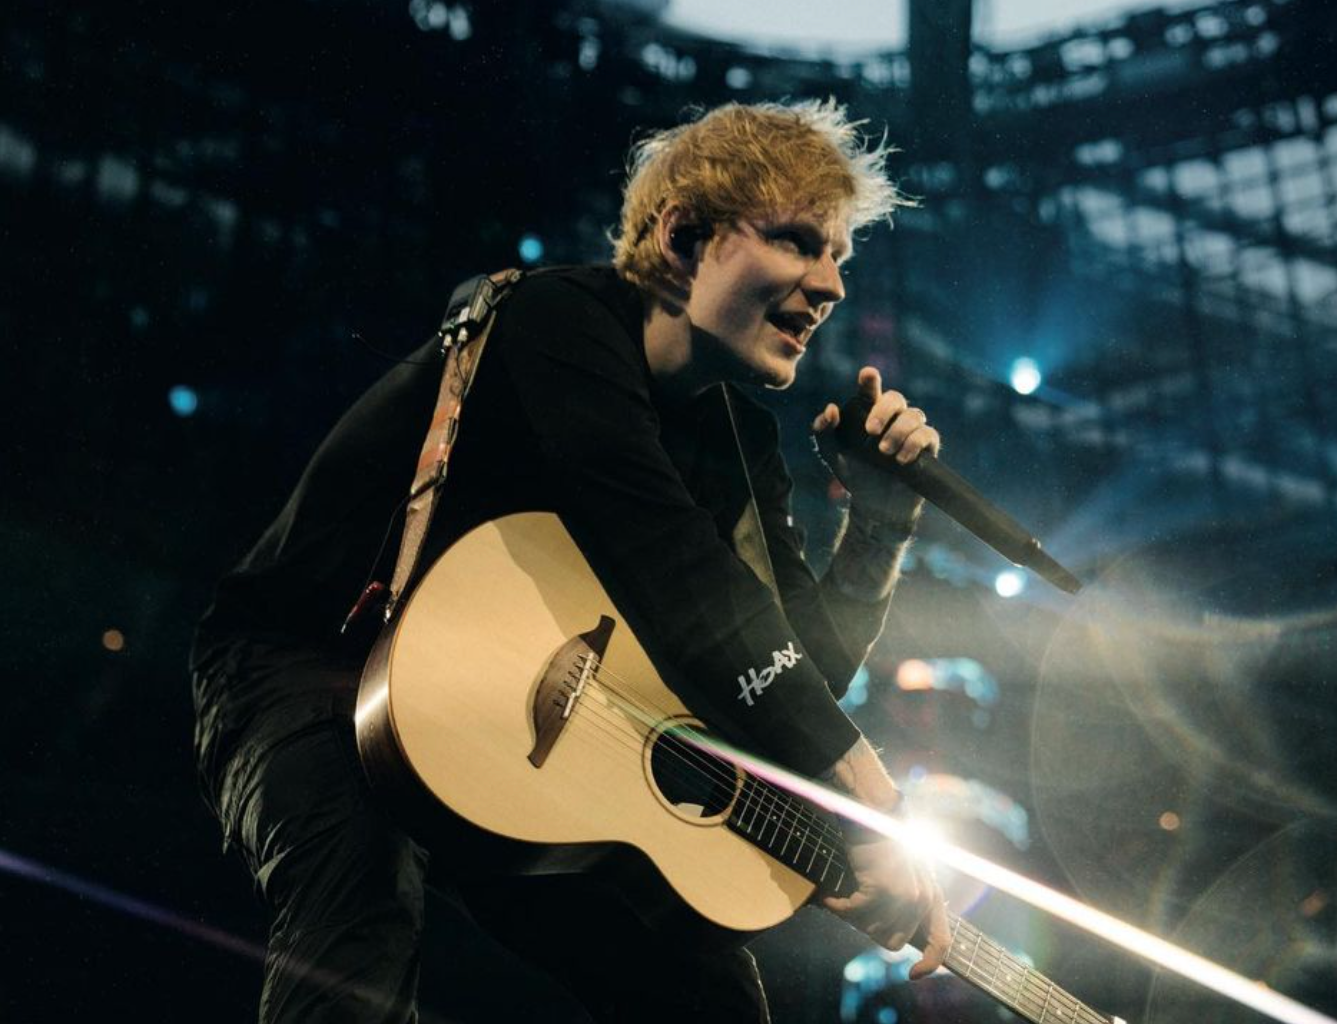 Ed Sheeran lookalike rescued by security after being mobbed by fans at Manchester gig, The Manc